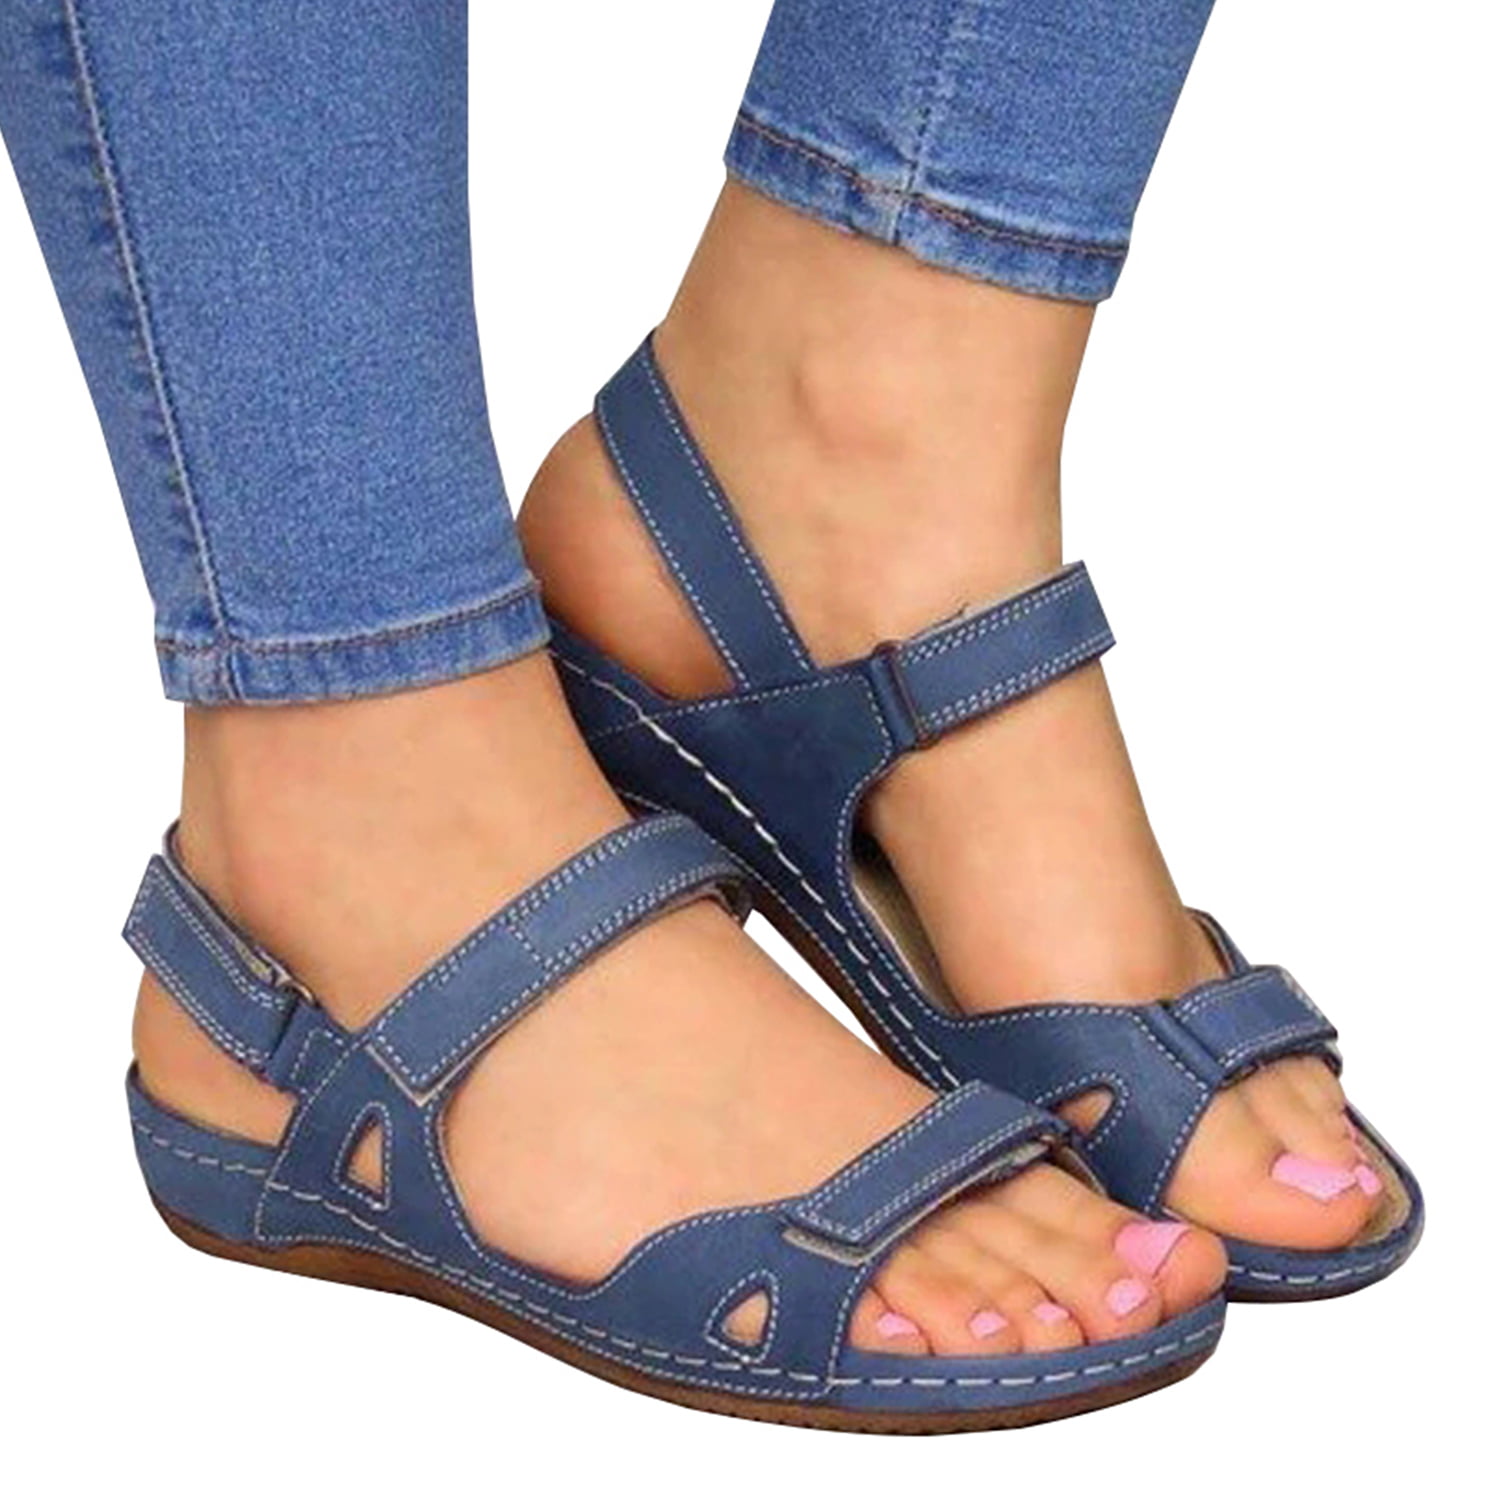 PU Leather Soft Sandals for Plantar Beach Flip Flops Toe Post Sandal Women Comfy Platform Sandal Shoes Summer Beach Travel Shoes Ladies Orthotic Sandals with Arch Support